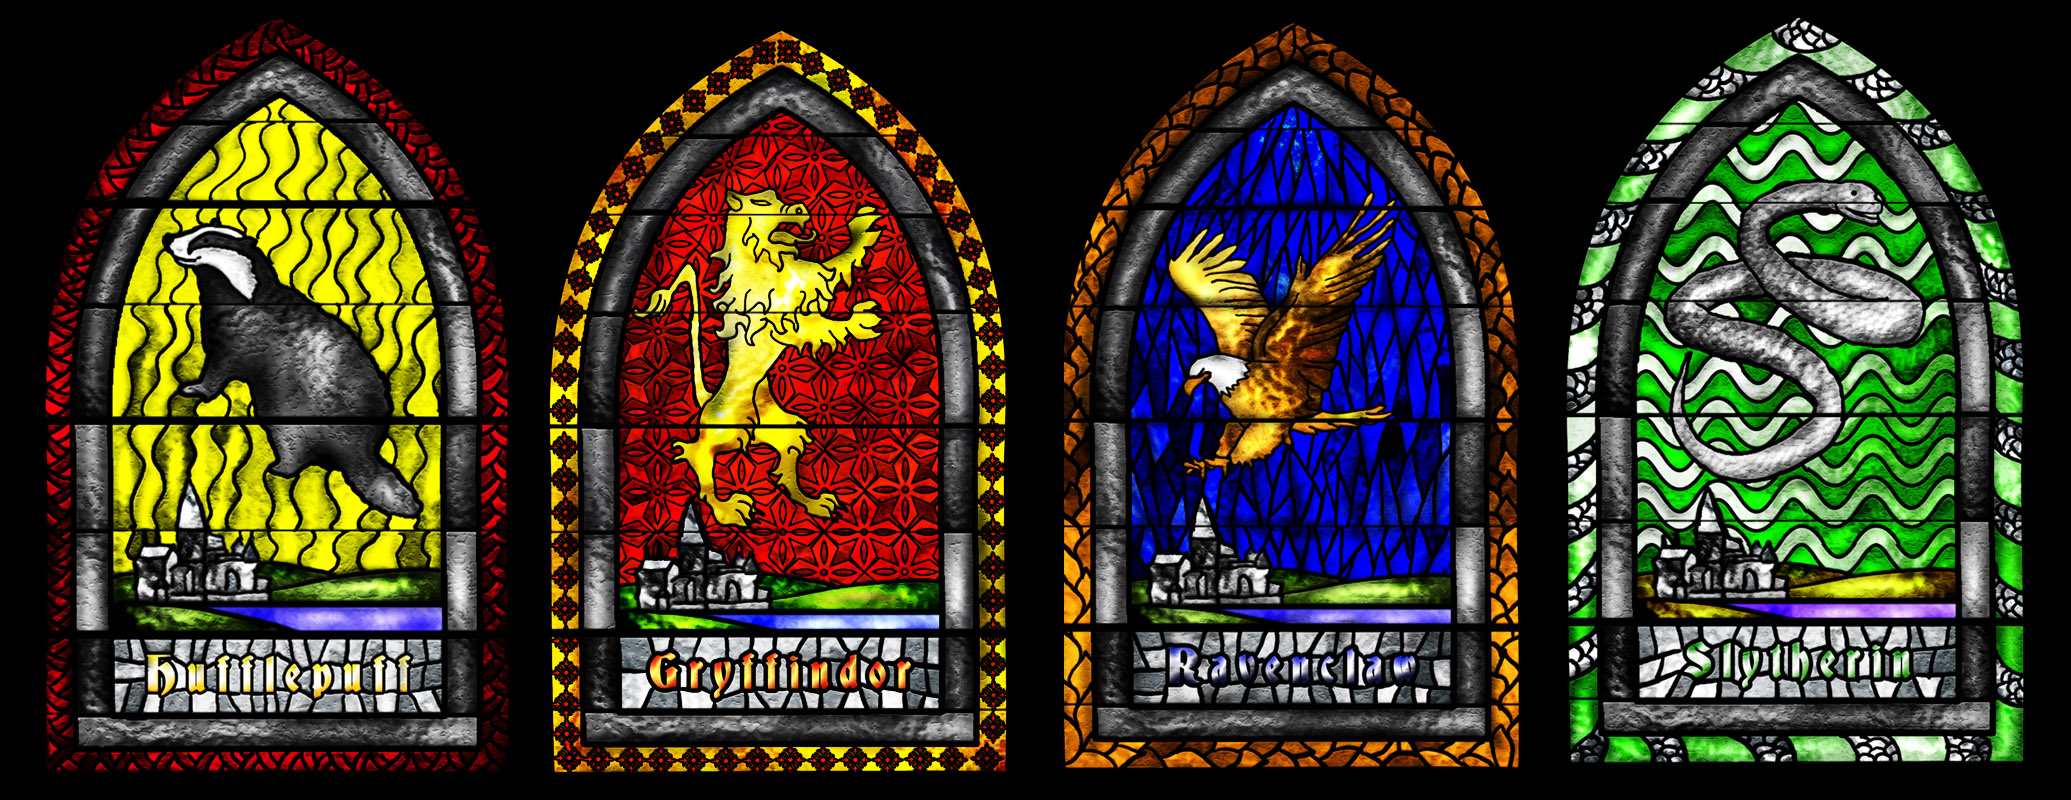 Harry Potter Stained Glass Window - HD Wallpaper 